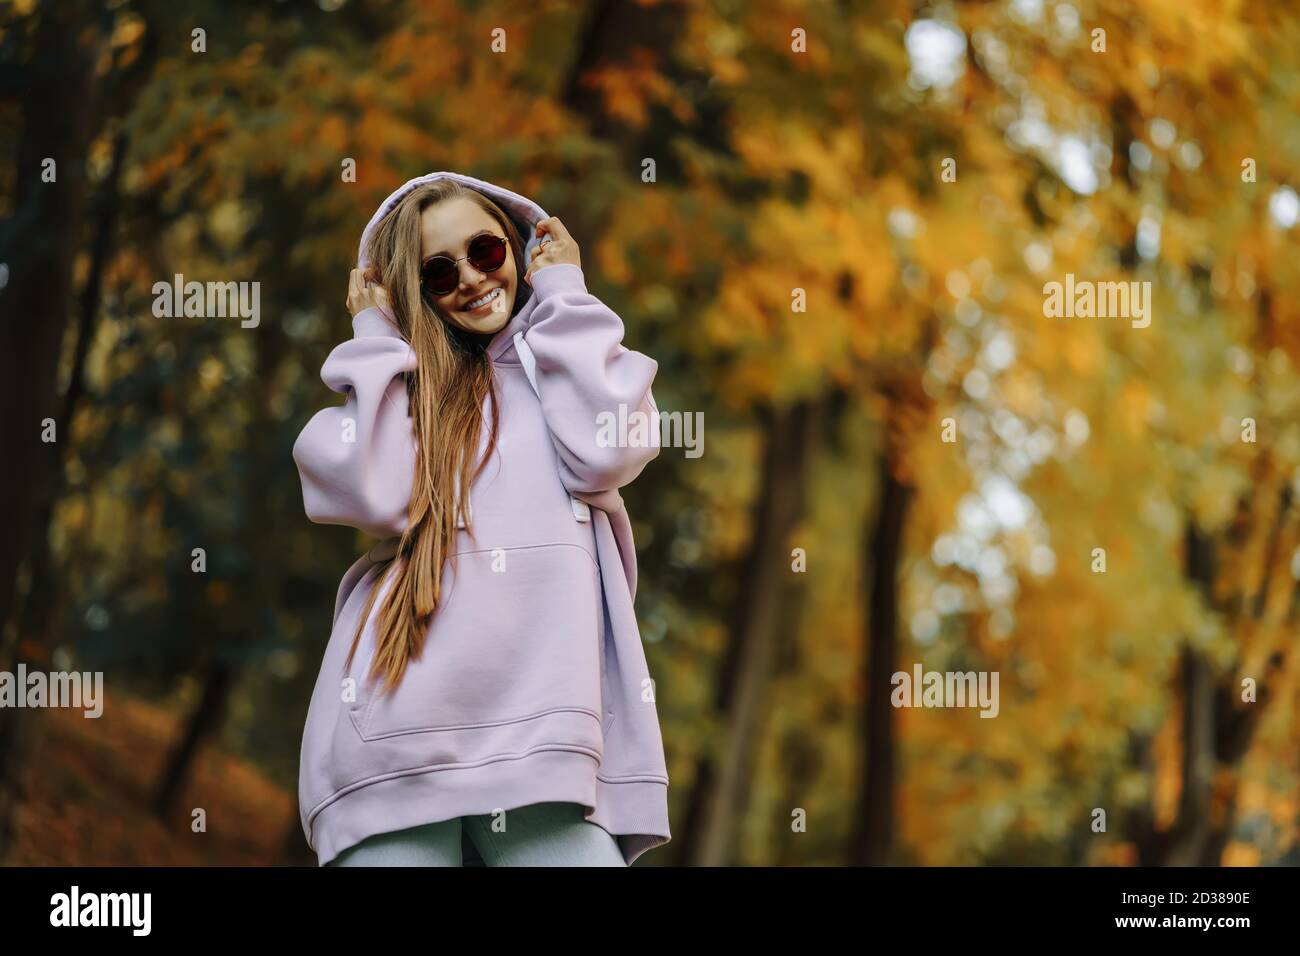 Beautiful happy smiling young woman wearing pink hoodie walking in autumn park. Season and people concept. Stock Photo